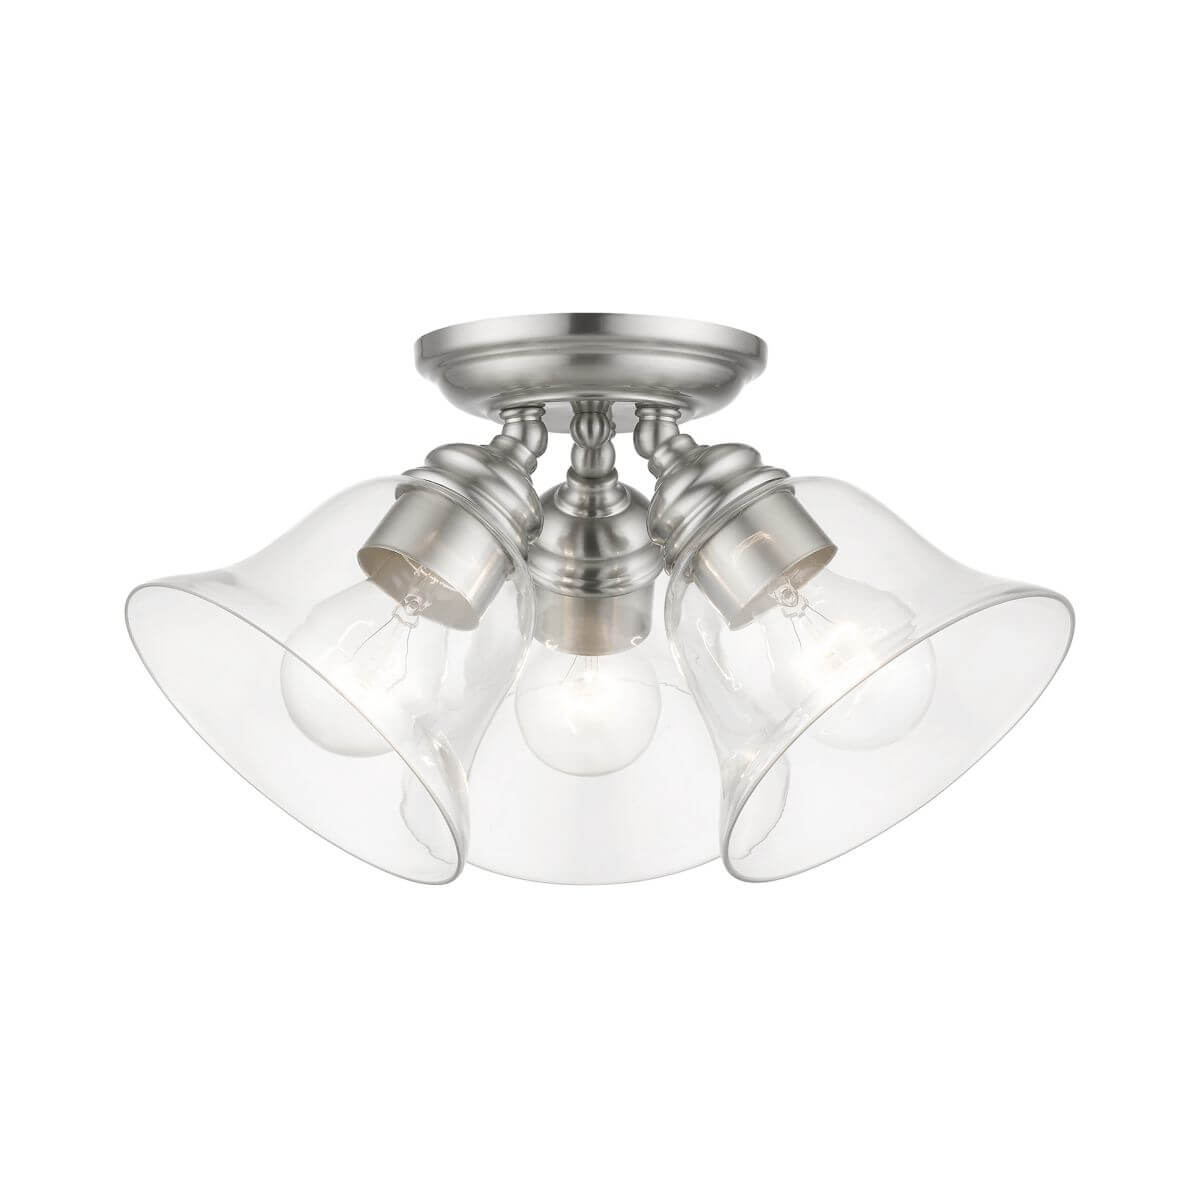 Livex 46489-91 Moreland 3 Light 15 inch Semi-Flush Mount in Brushed Nickel with Hand Blown Clear Glass